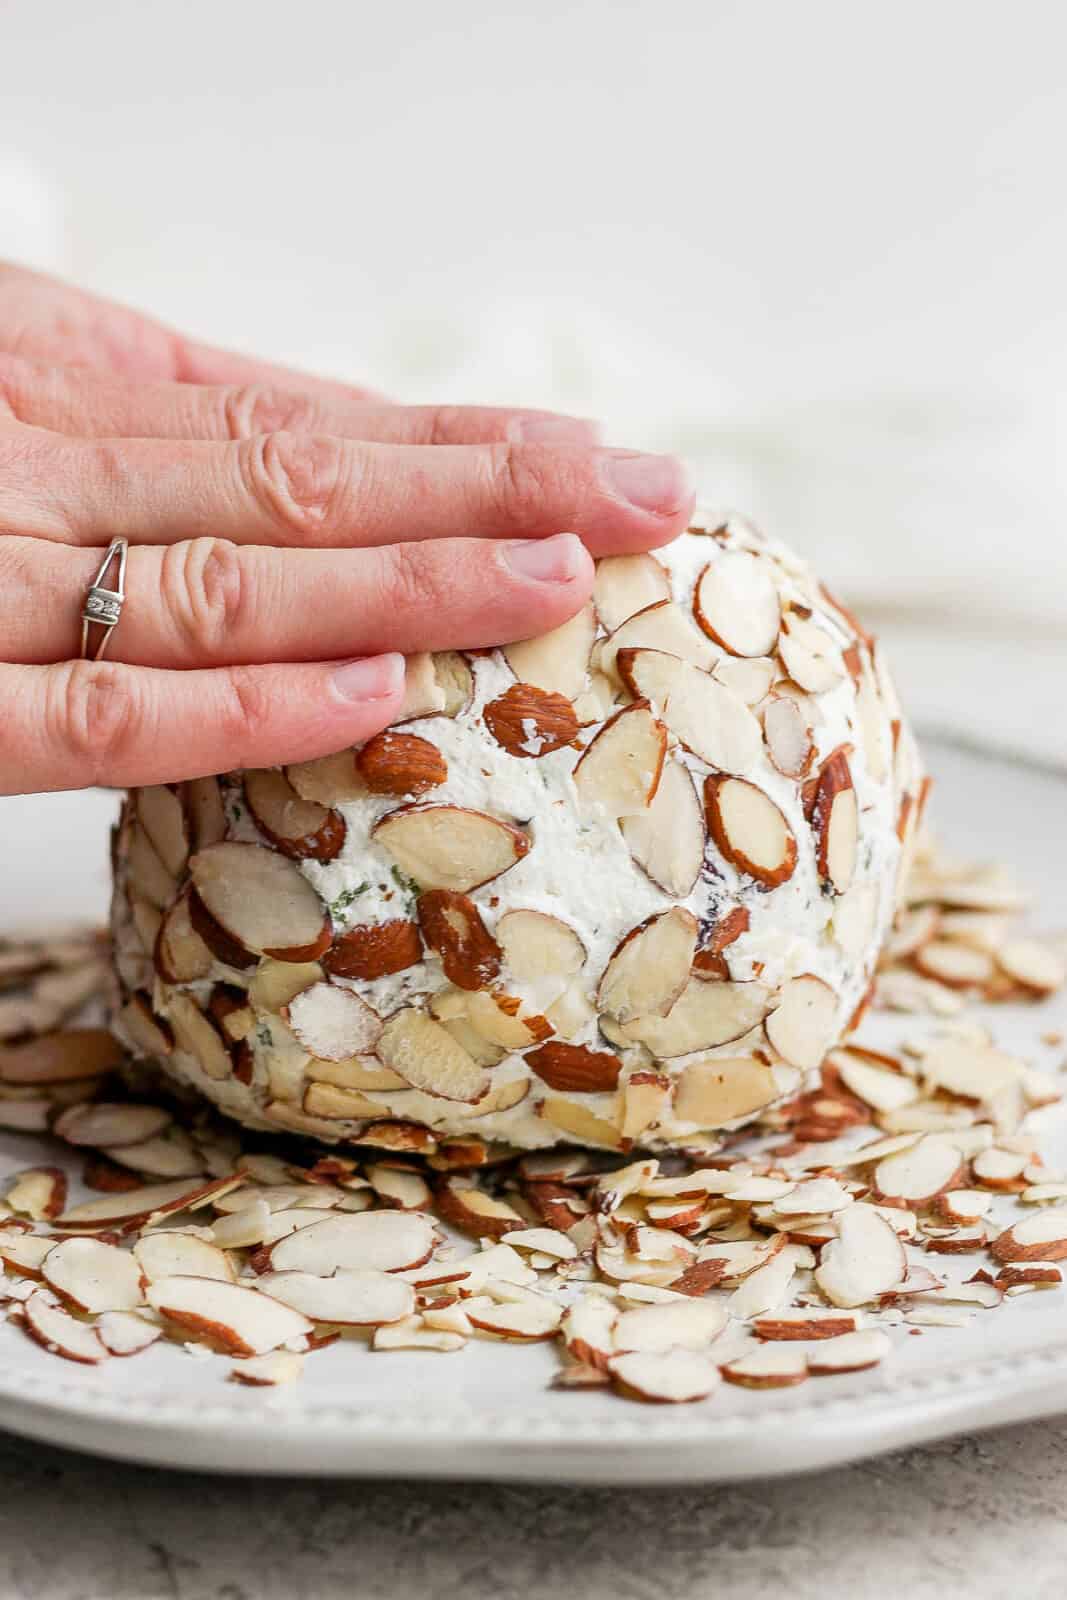 Hands rolling the goat cheese ball in slivered almonds.